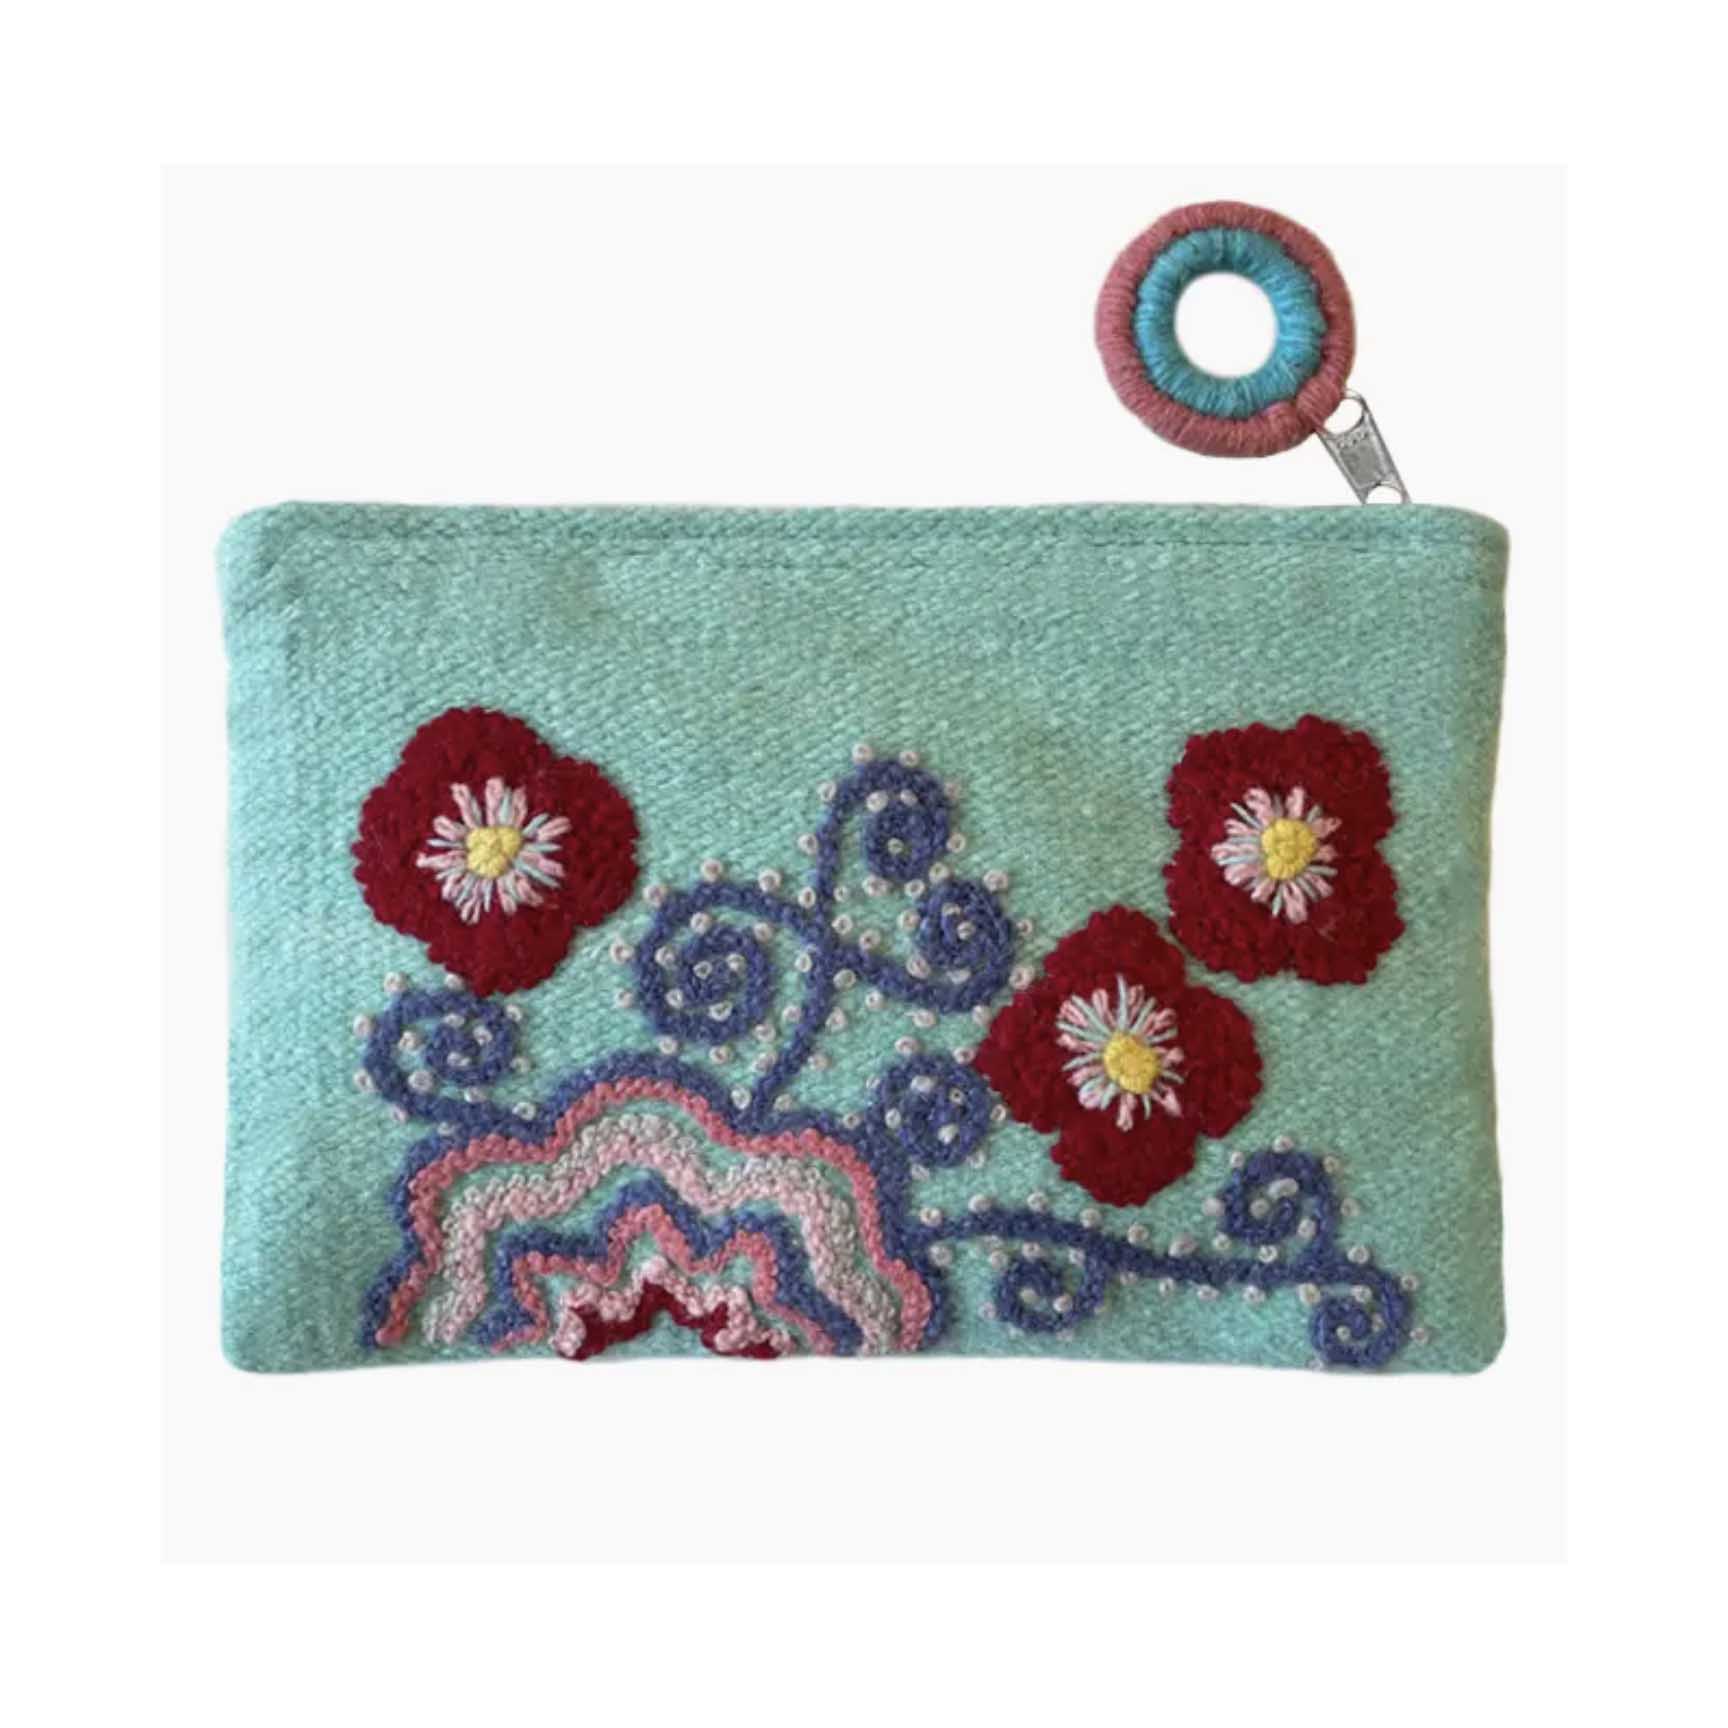 Jenny Krauss Posey Embroidered Wool Pouch